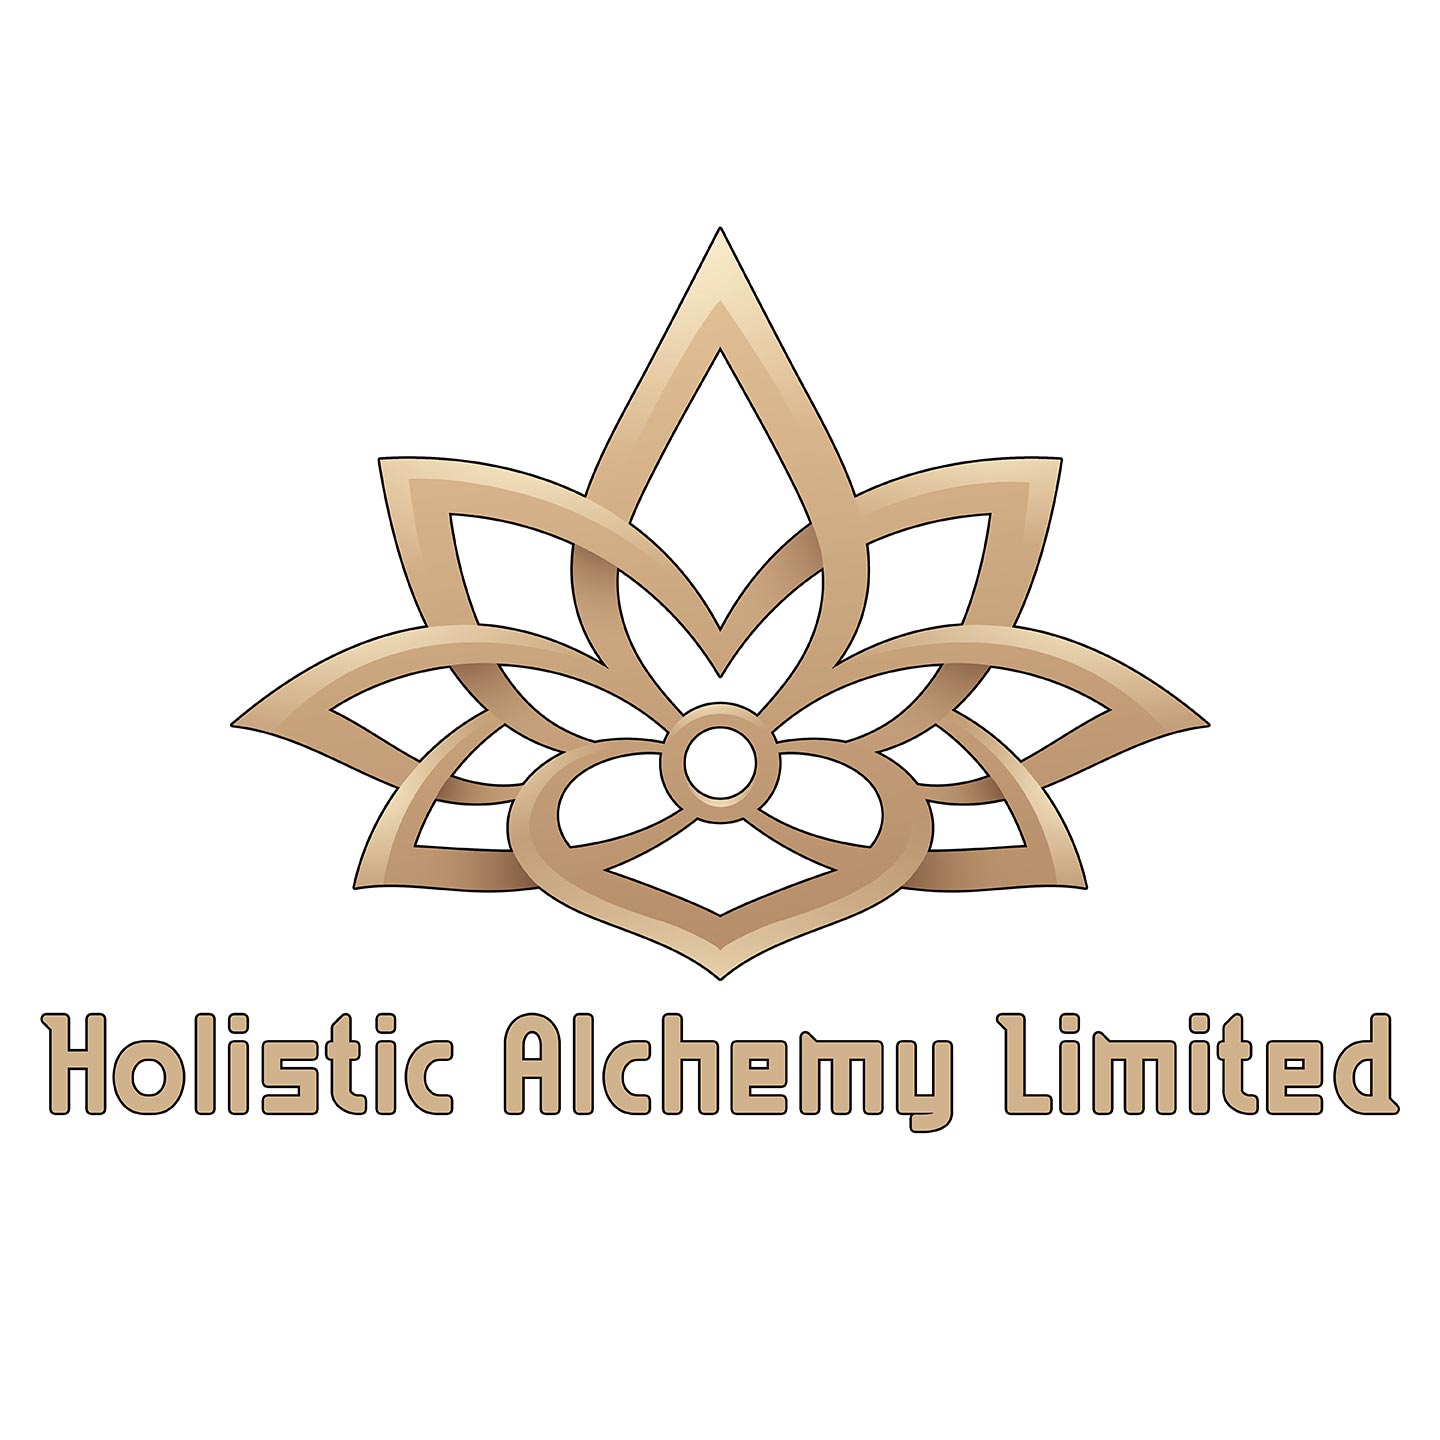 Welcome to Holistic Alchemy Limited